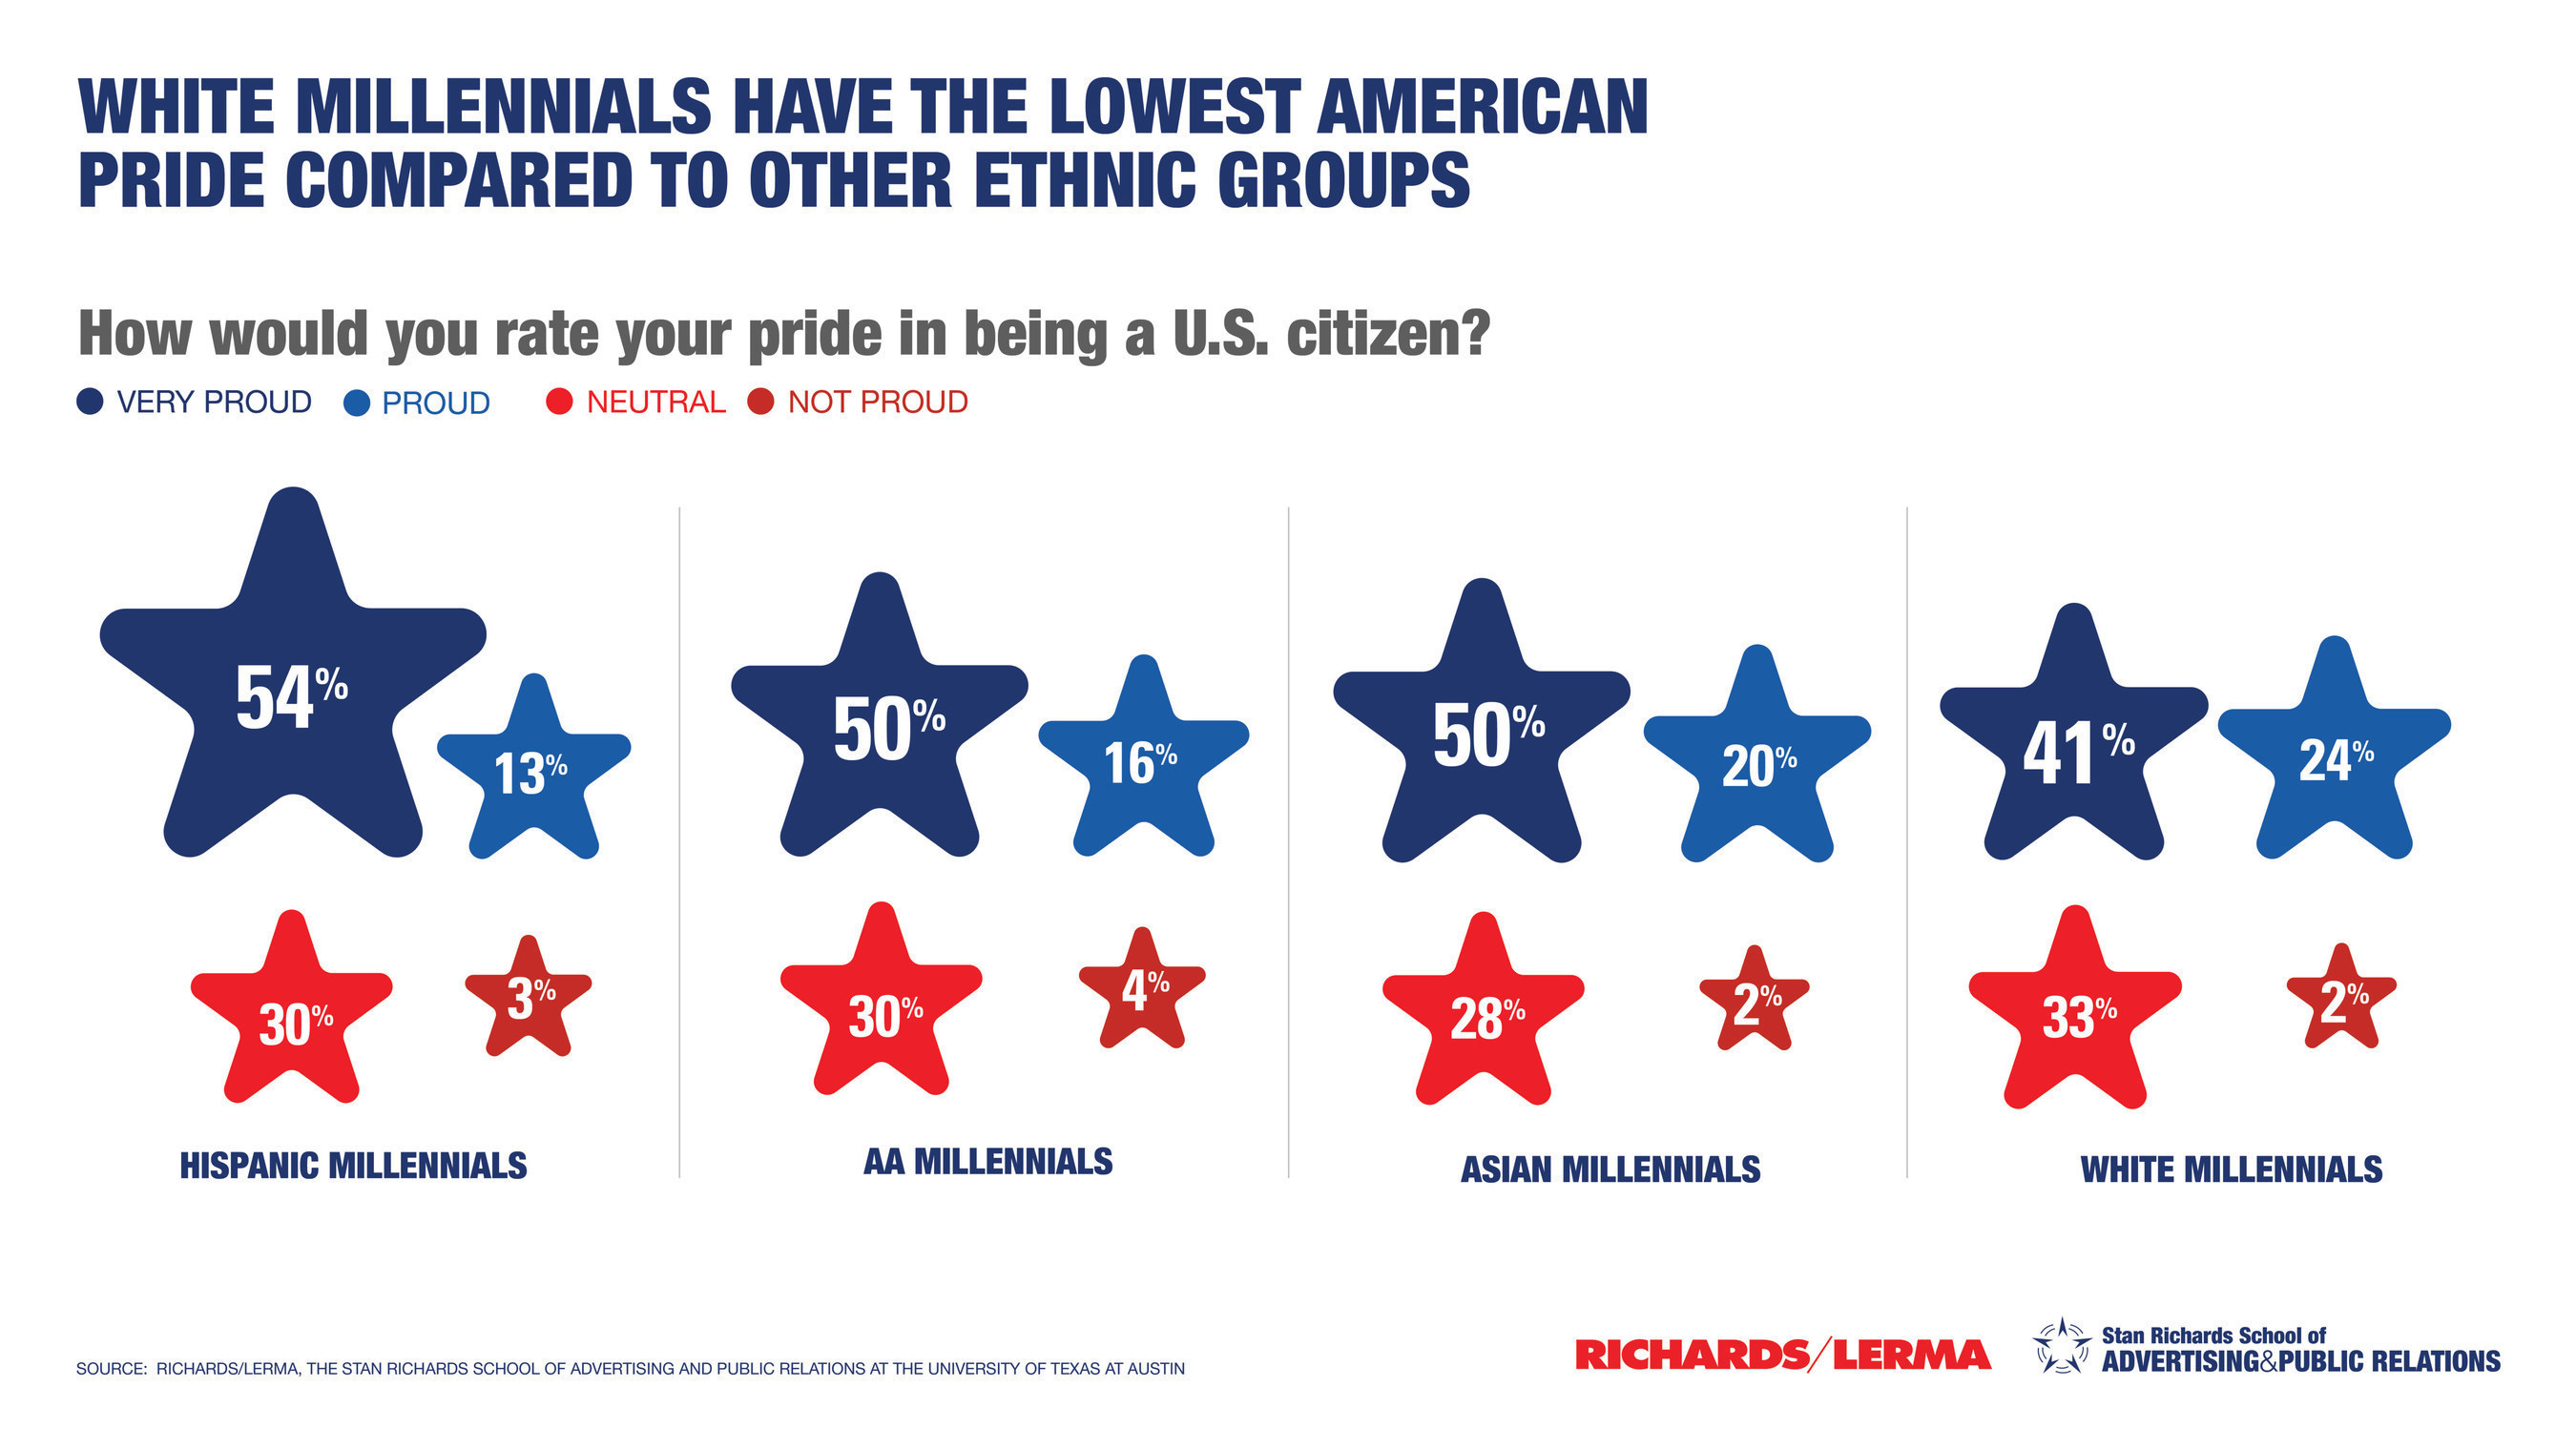 White millennials have the lowest American pride compared to other ethnic groups